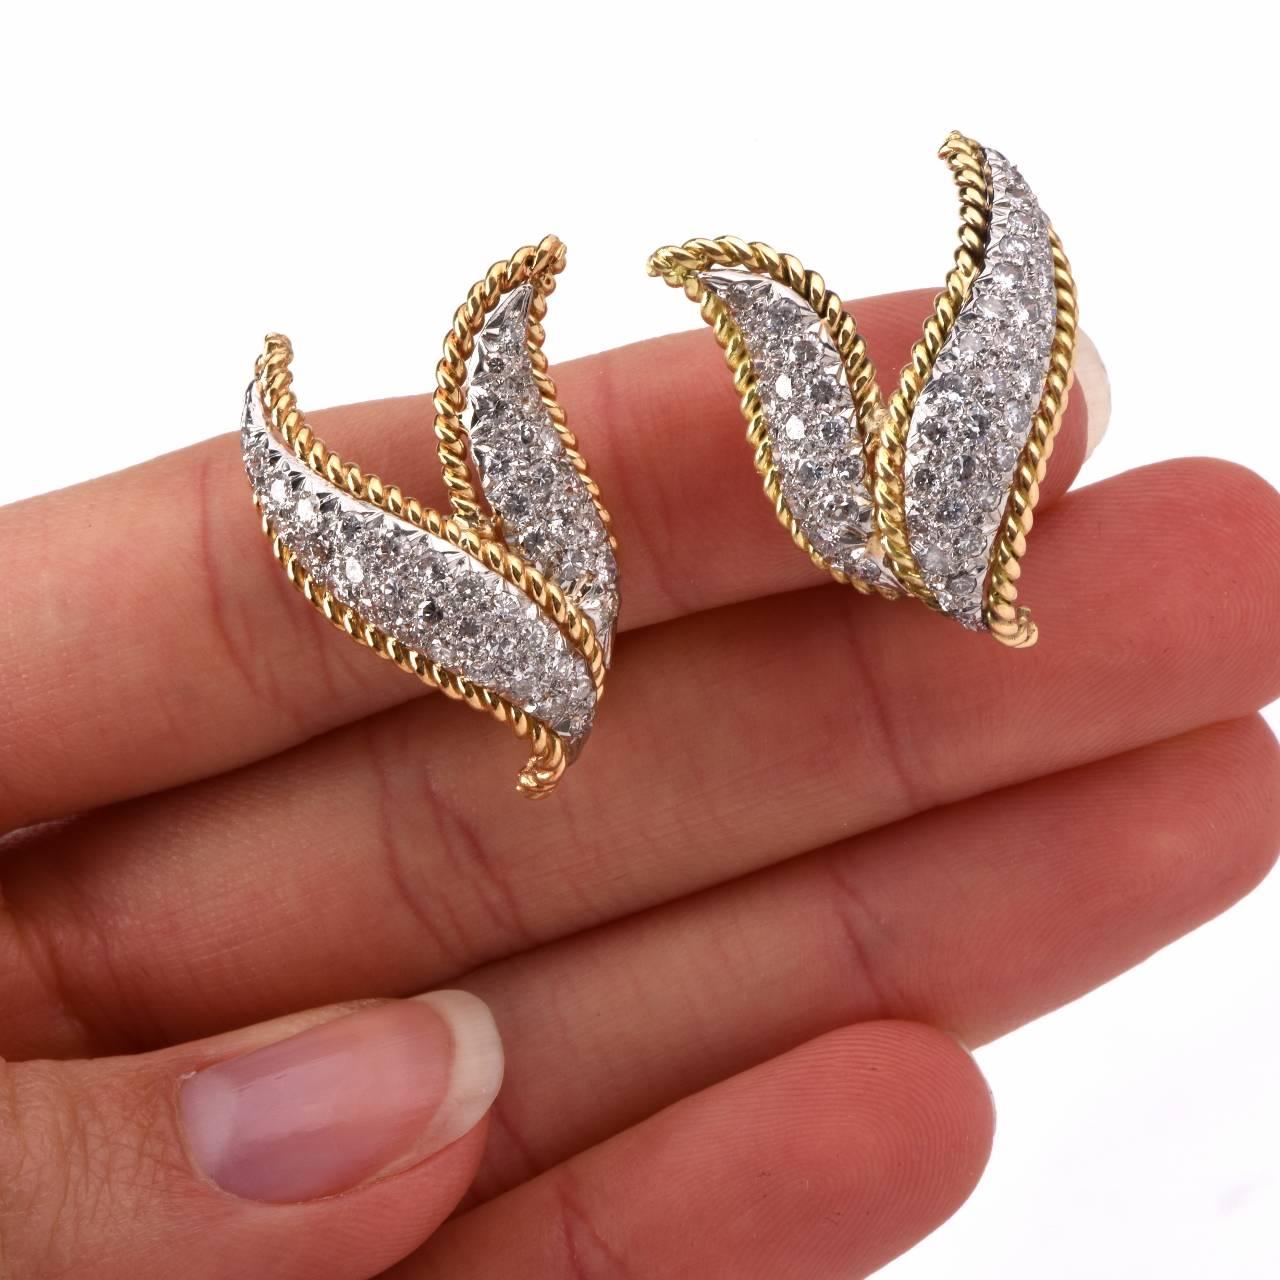 These timelessly elegant and enchanting estate earrings are crafted in a combination of solid 18K white and yellow gold, weigh 14.1 grams and measure 28 x 22 mm. These earrings are designed as a pair of diamond-swathed, gracefully scrolled leaves, 